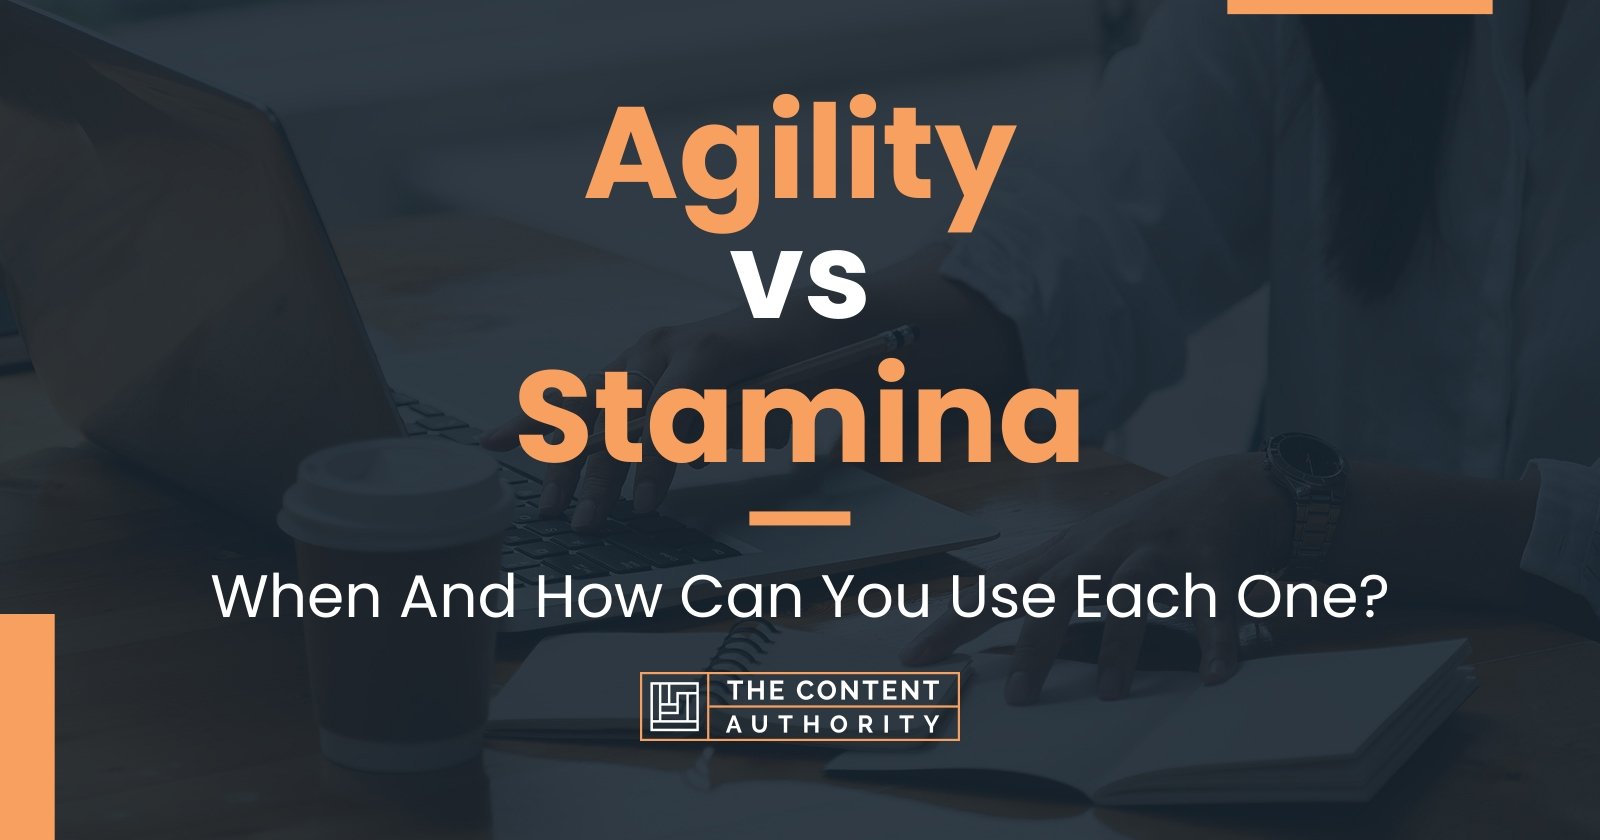 Agility vs Stamina: When And How Can You Use Each One?